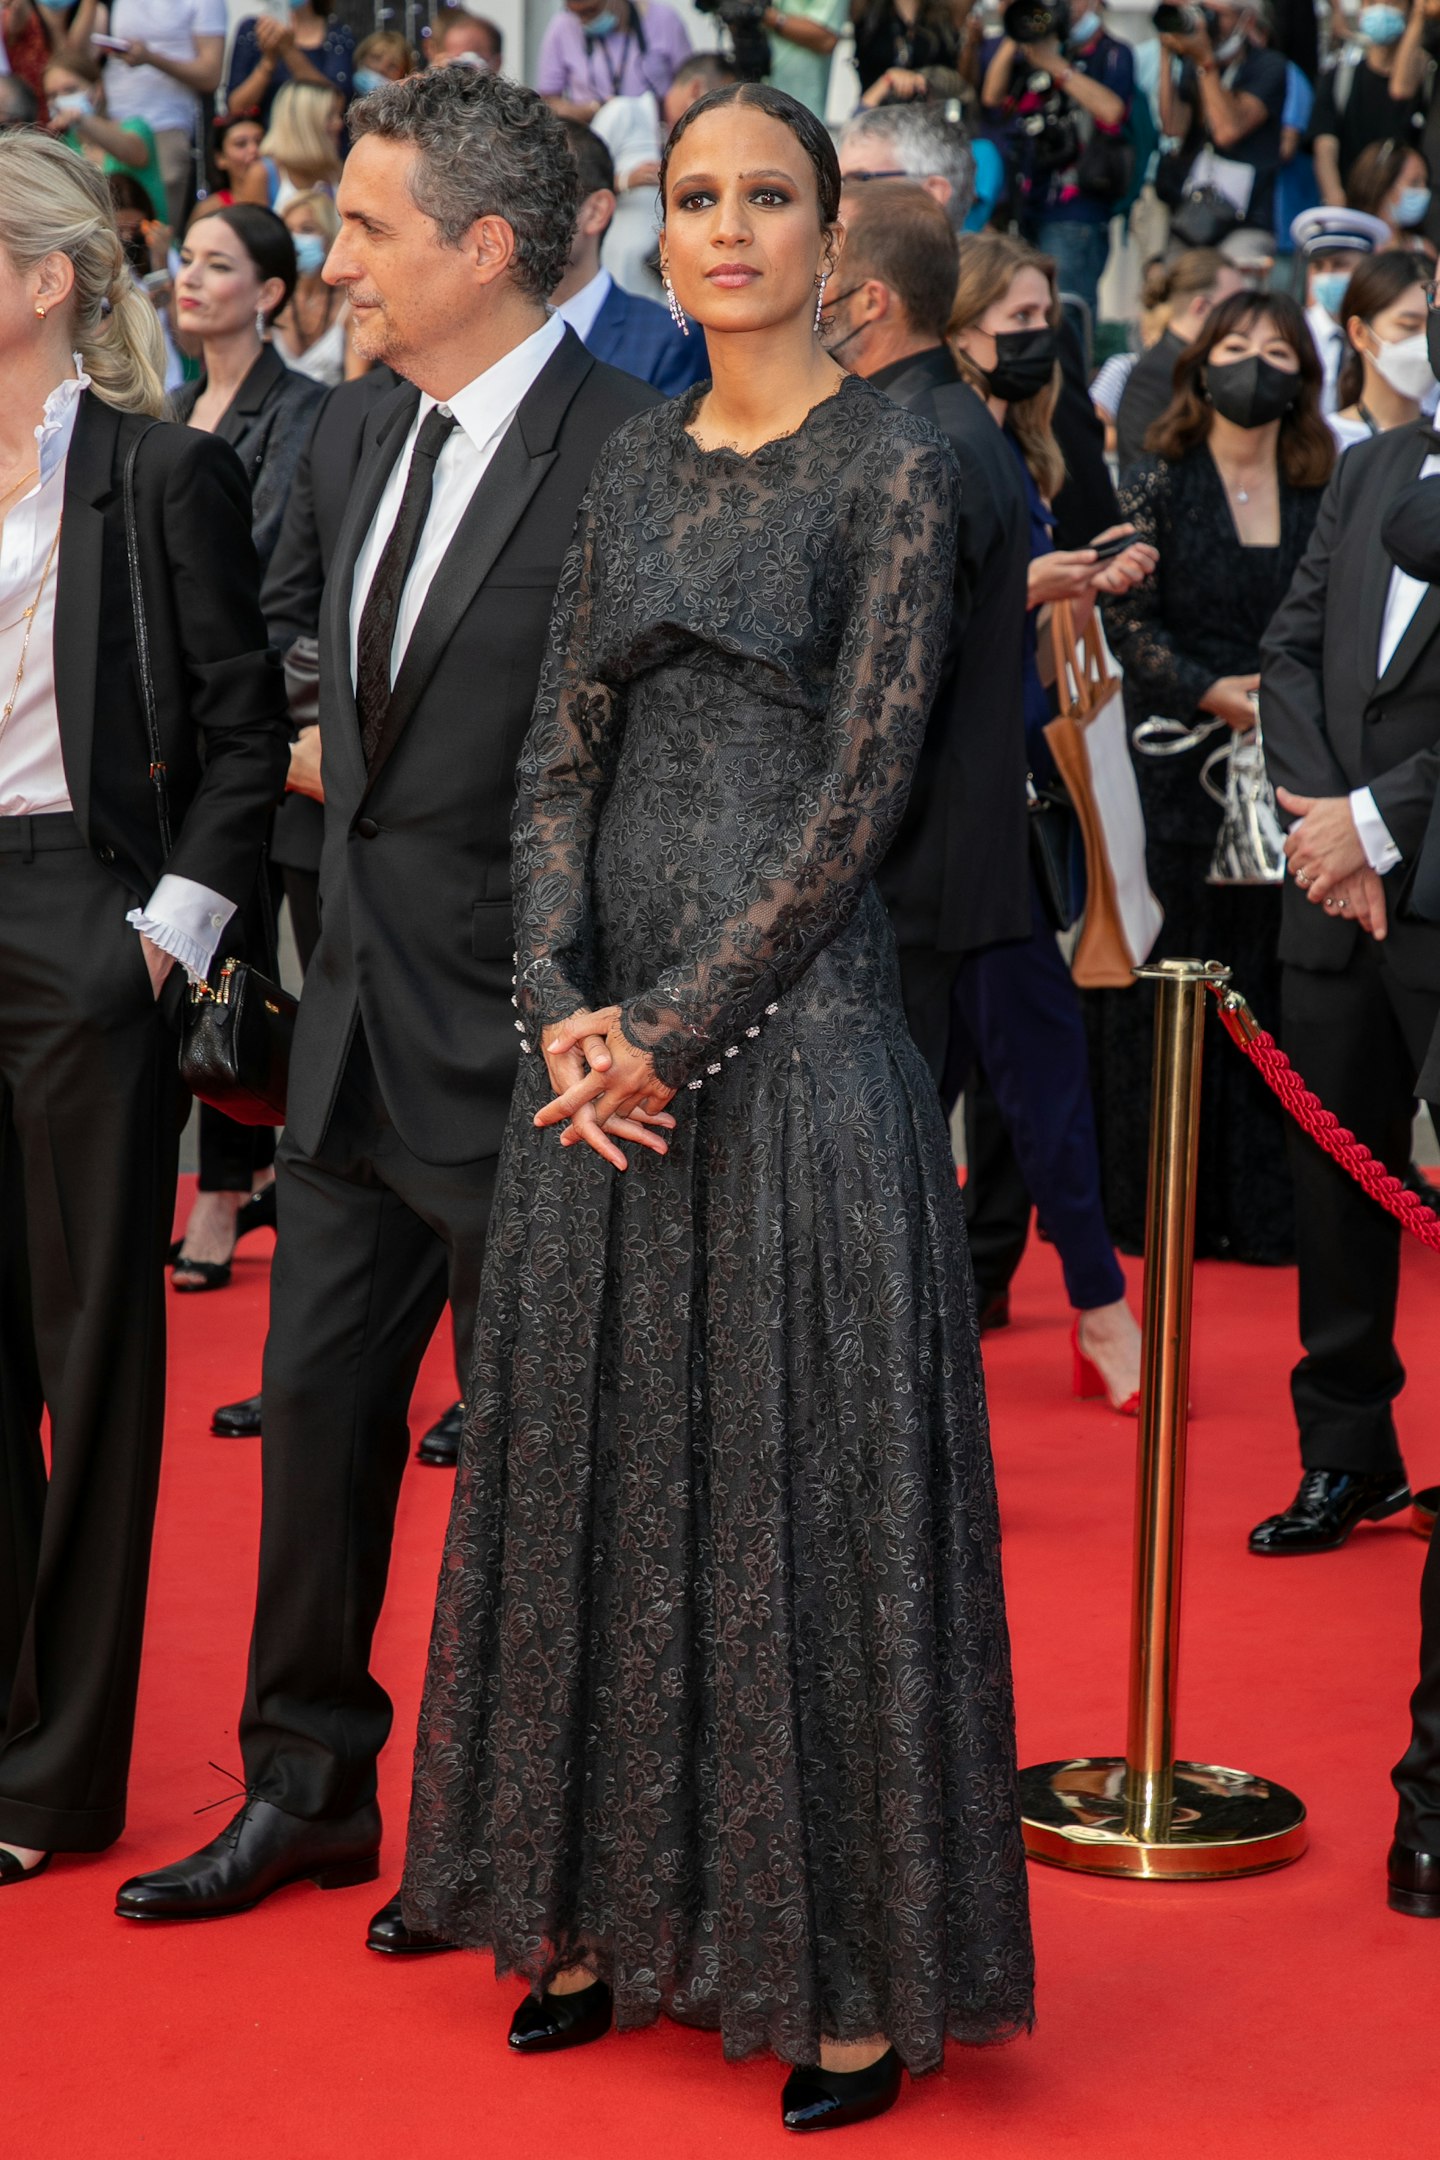 Mati Diop in a lace Chanel dress